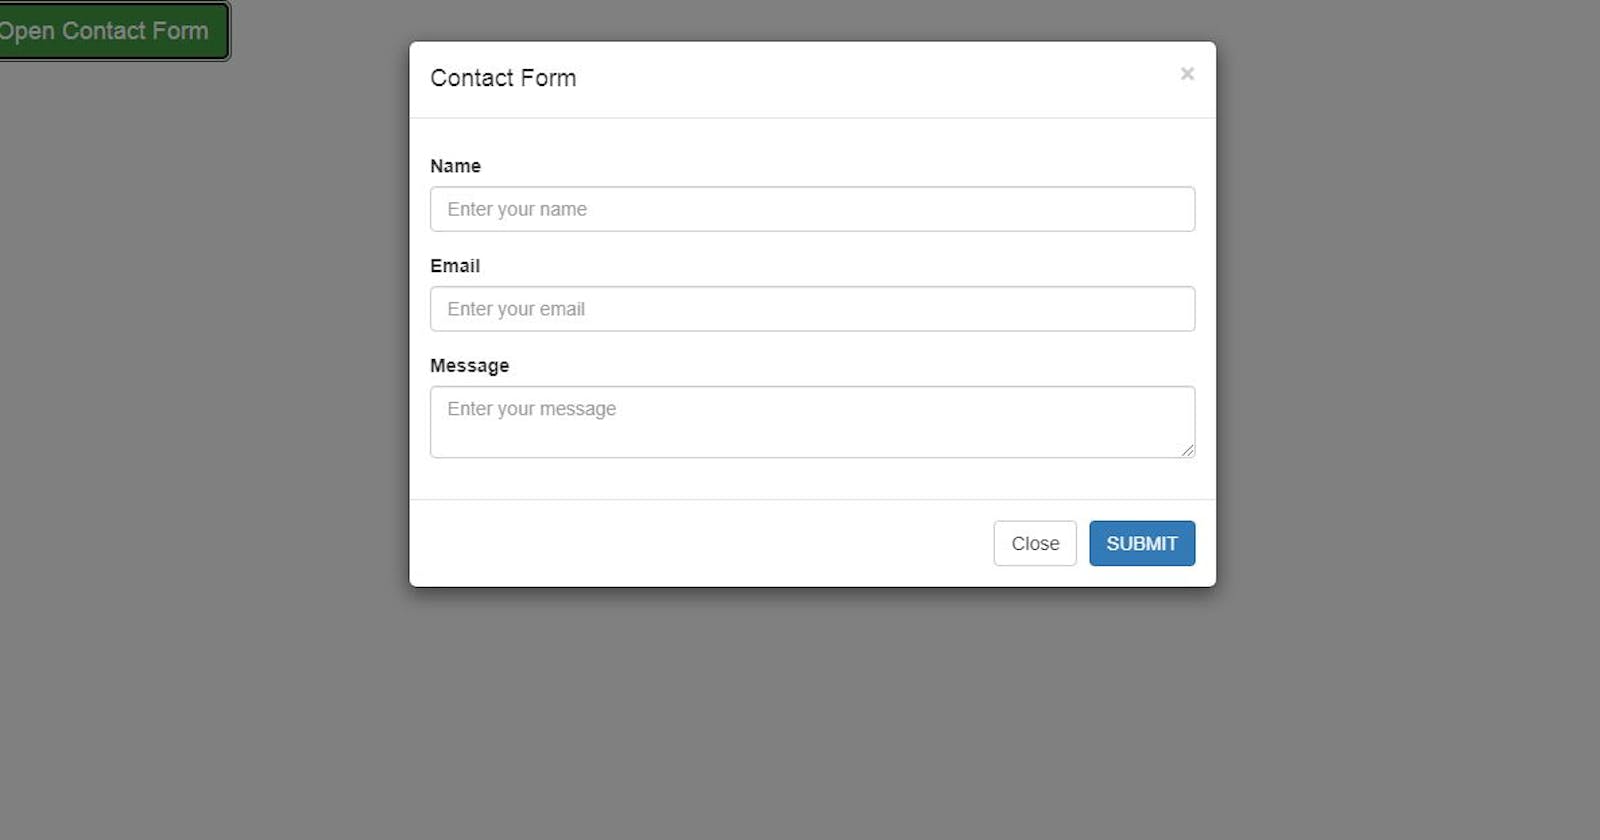 Integrate  Bootstrap Modal Popup Form and Submit  data to Email and MYSQL Database in PHP using Ajax